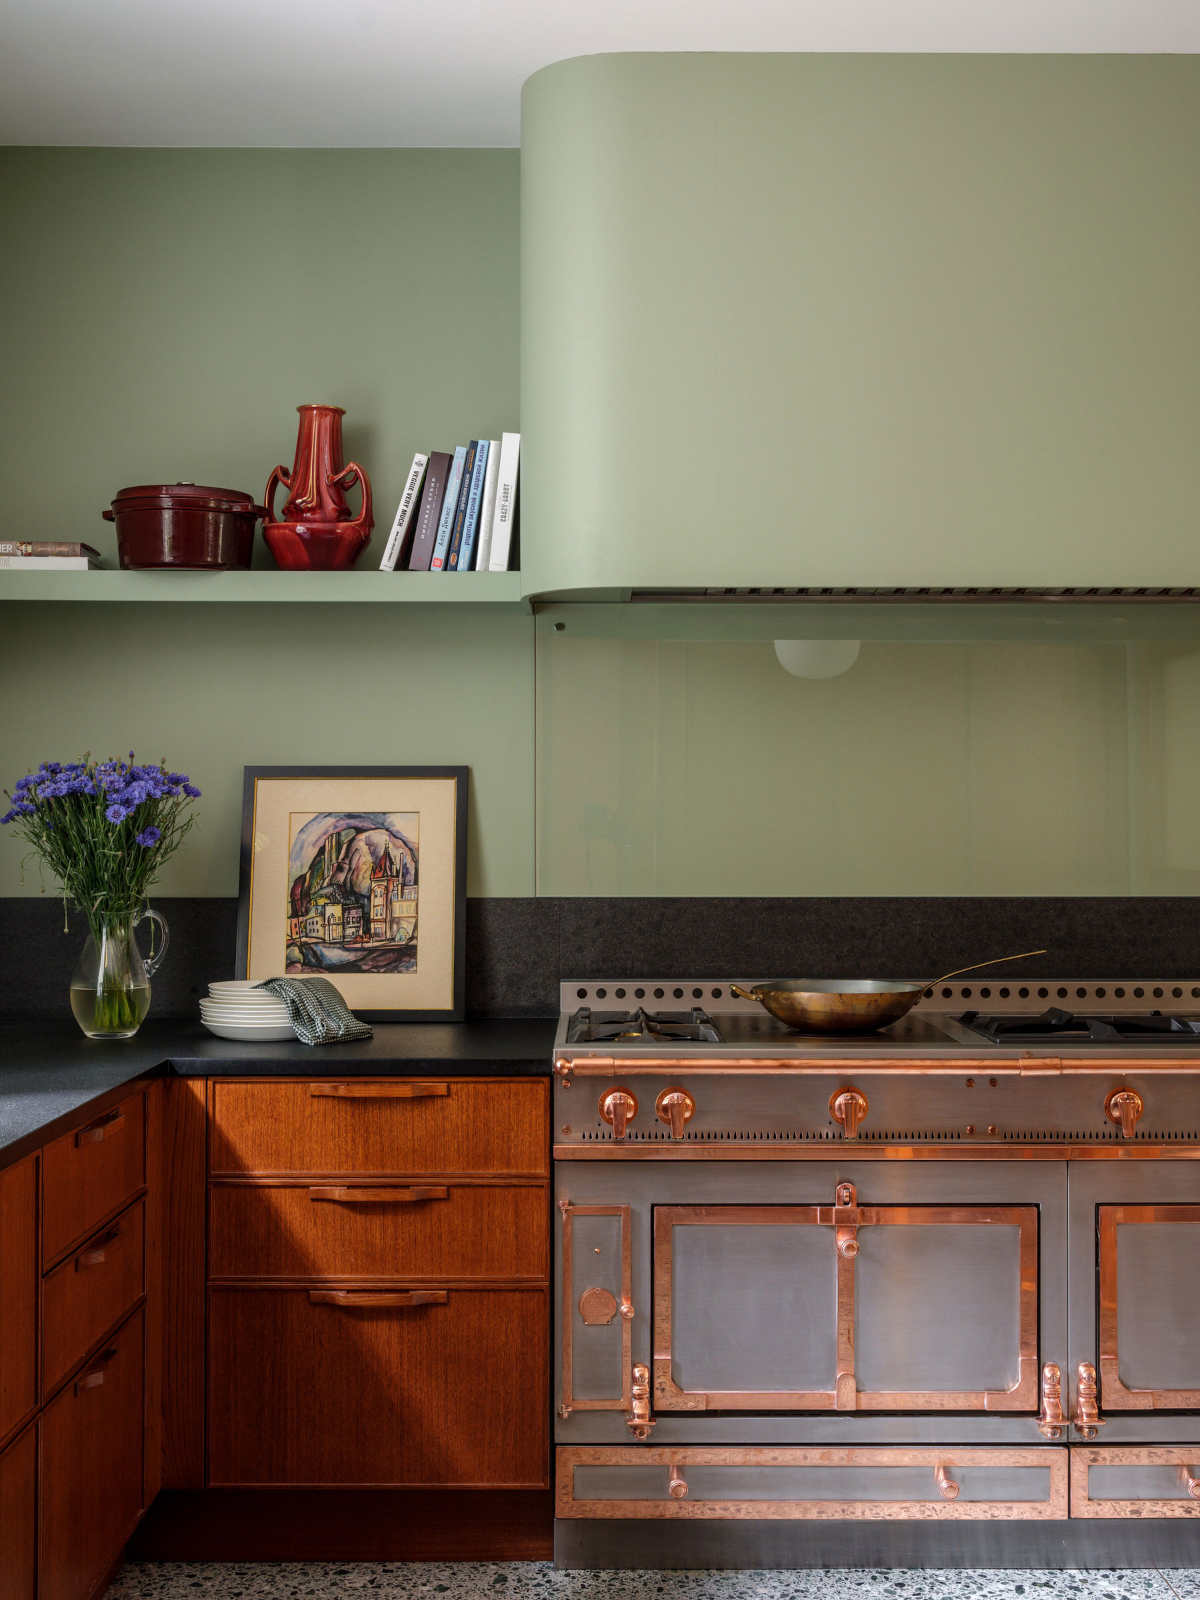 A curved olive range hood in a custom retro themed kitchen.